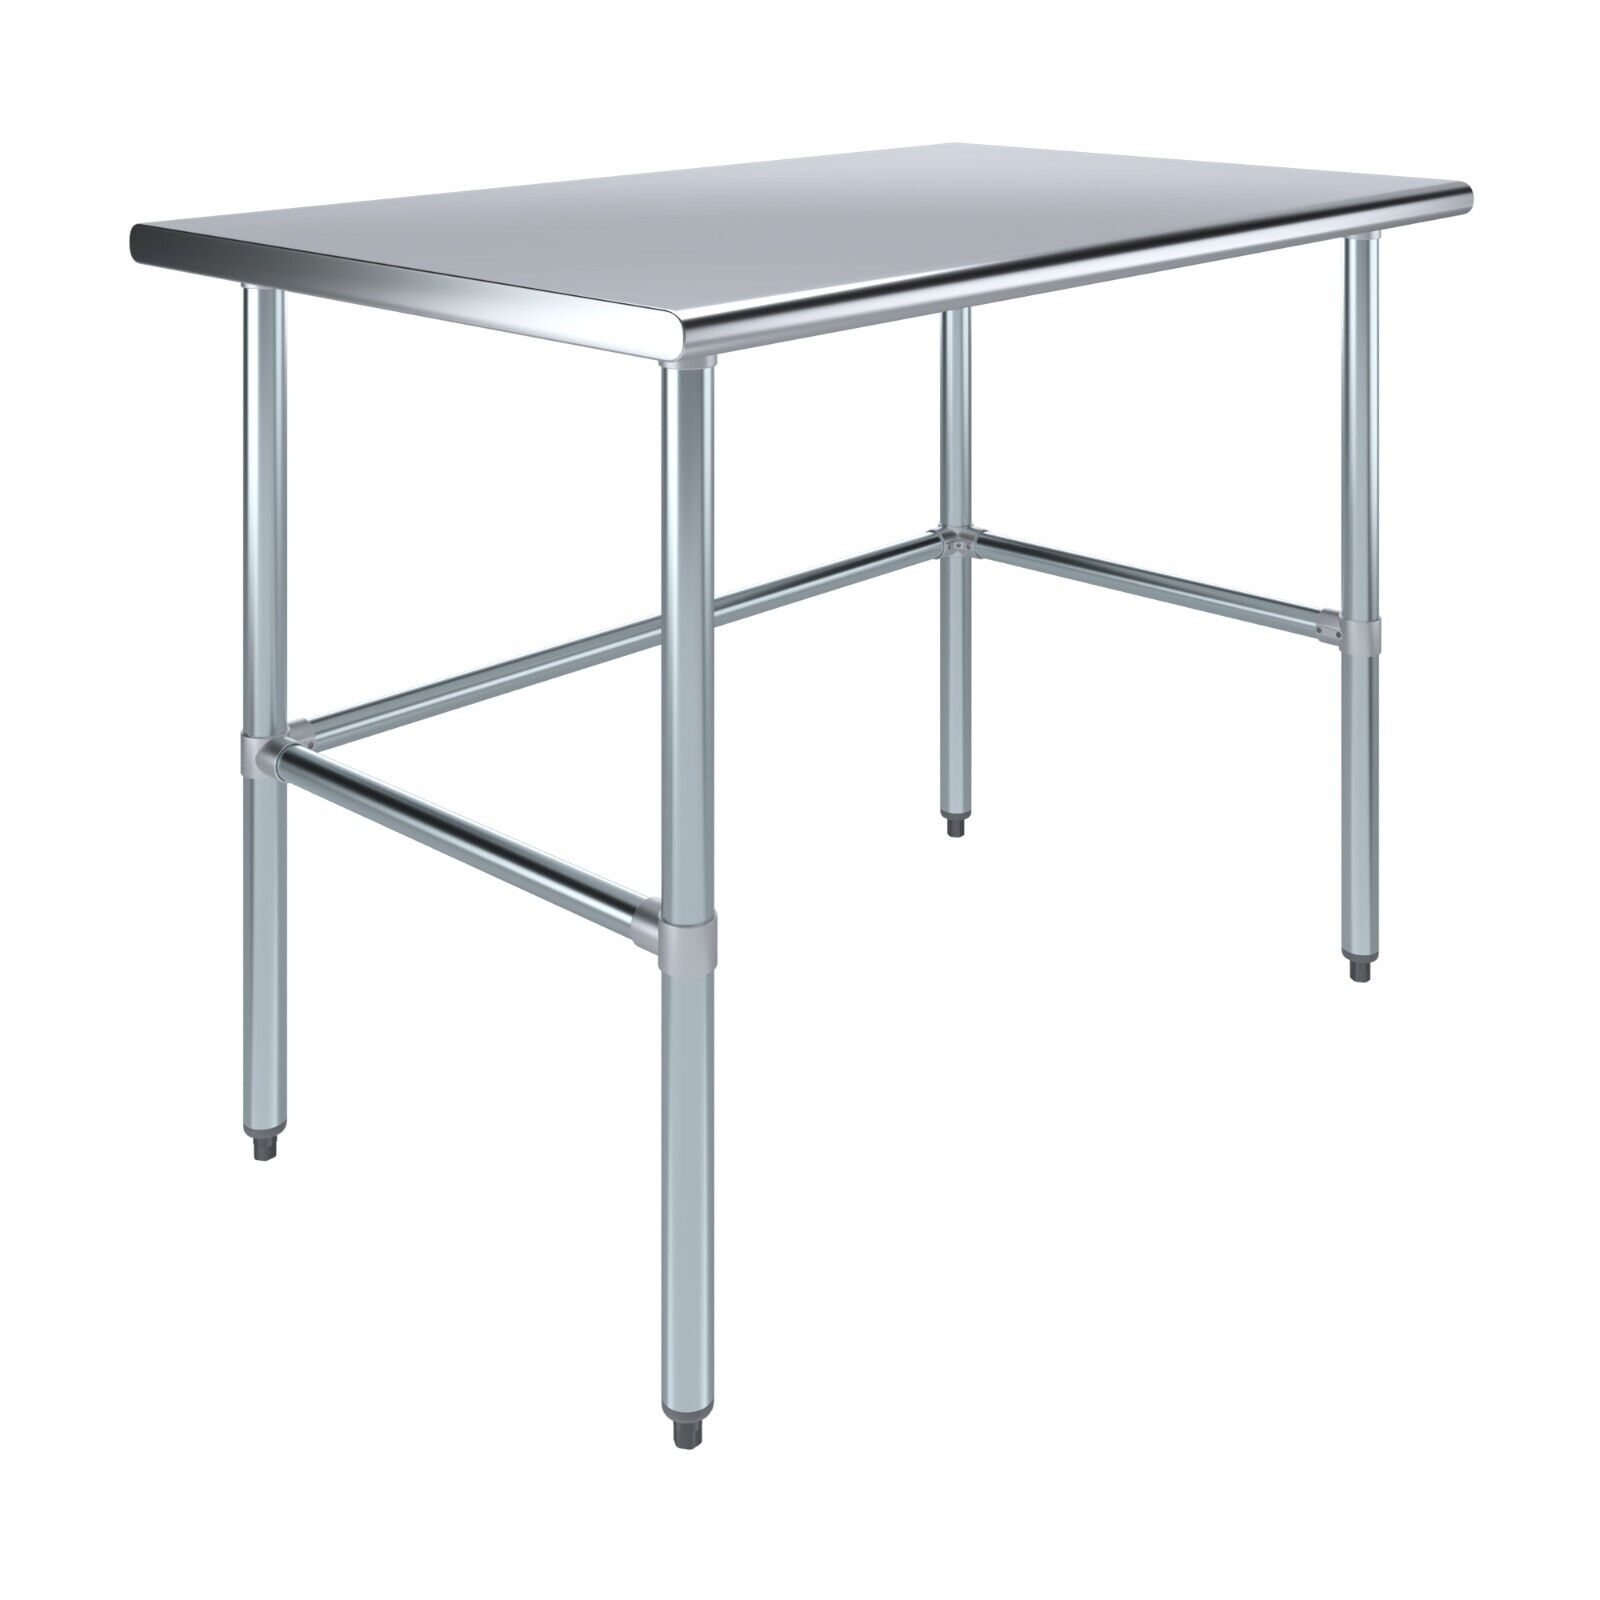 30 in. x 48 in. Open Base Stainless Steel Work Table | Residential & Commercial